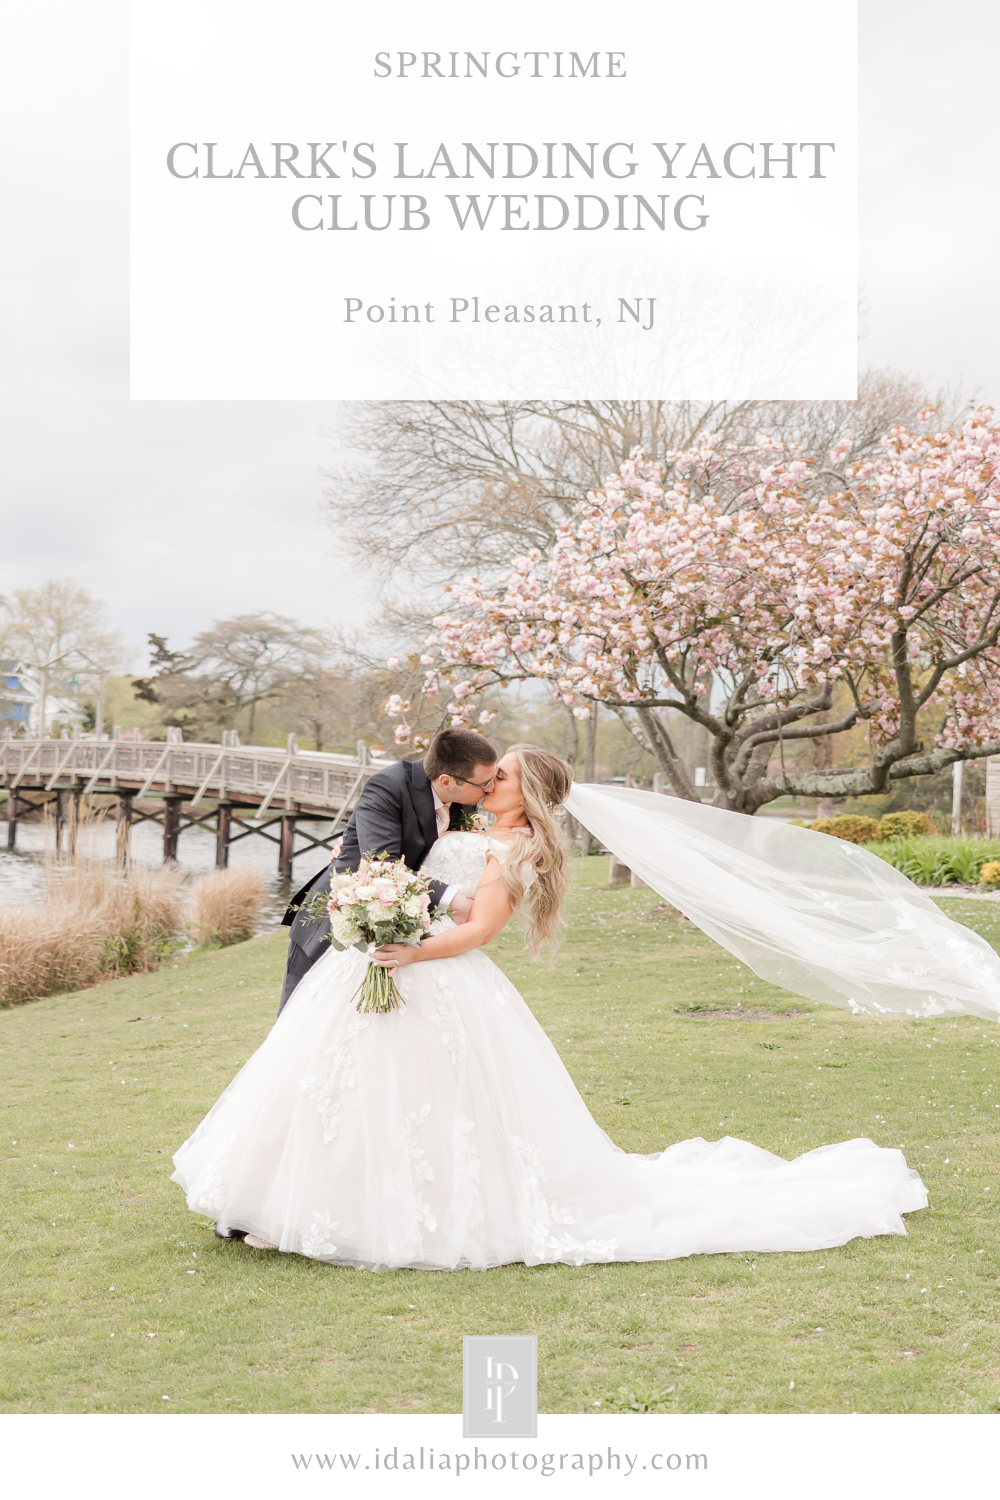 Clark's Landing Yacht Club Wedding in the spring photographed by New Jersey wedding photographer Idalia Photography